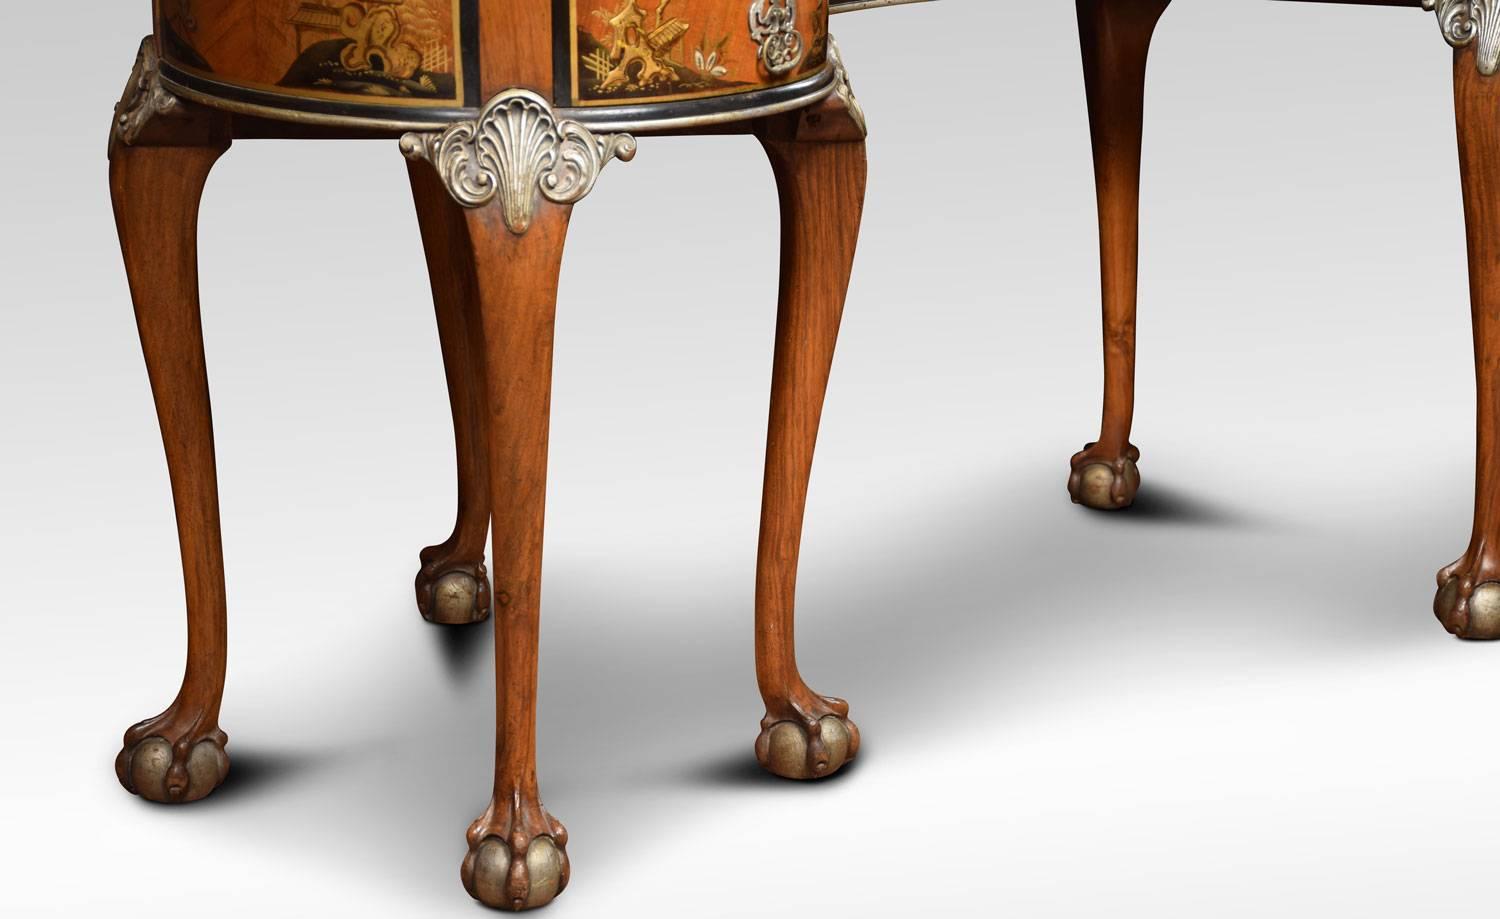 British Walnut Kidney Shaped Chinoiserie Decorated Dressing Table